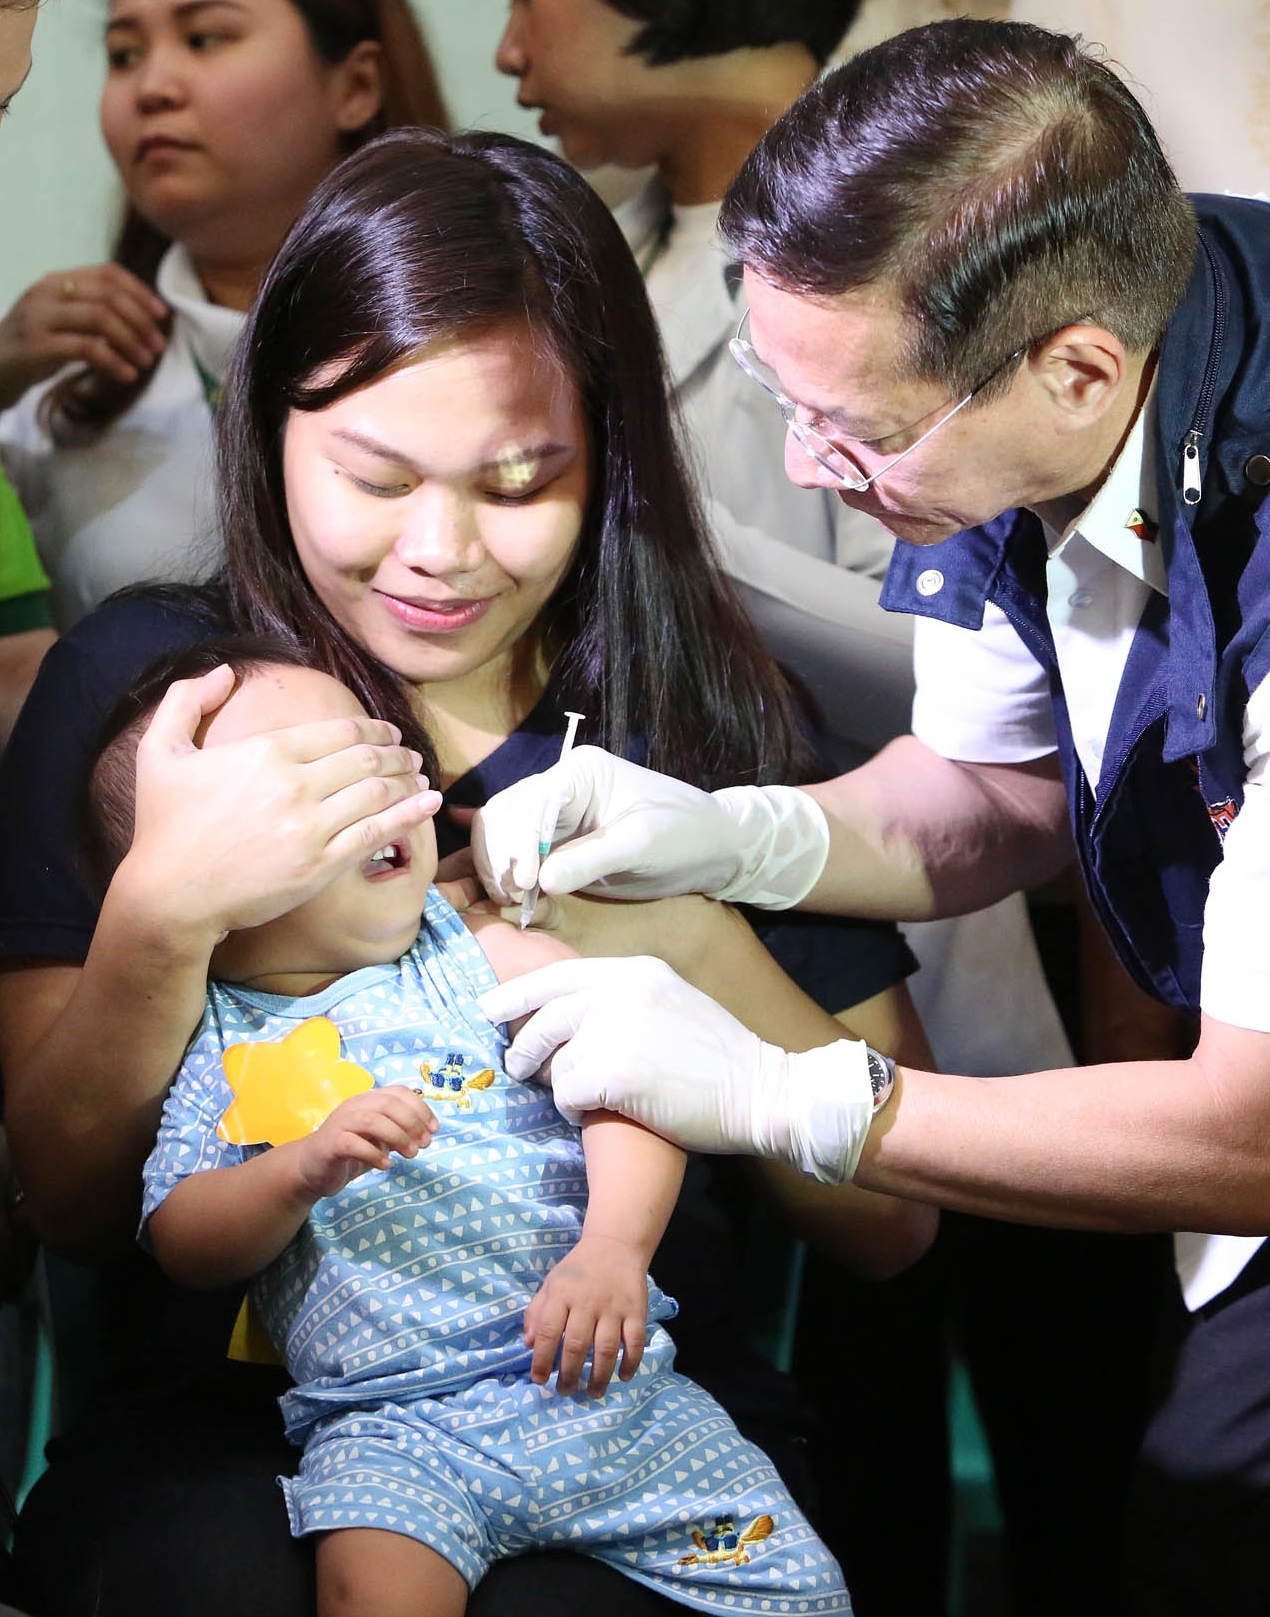 Measles cases keep rising